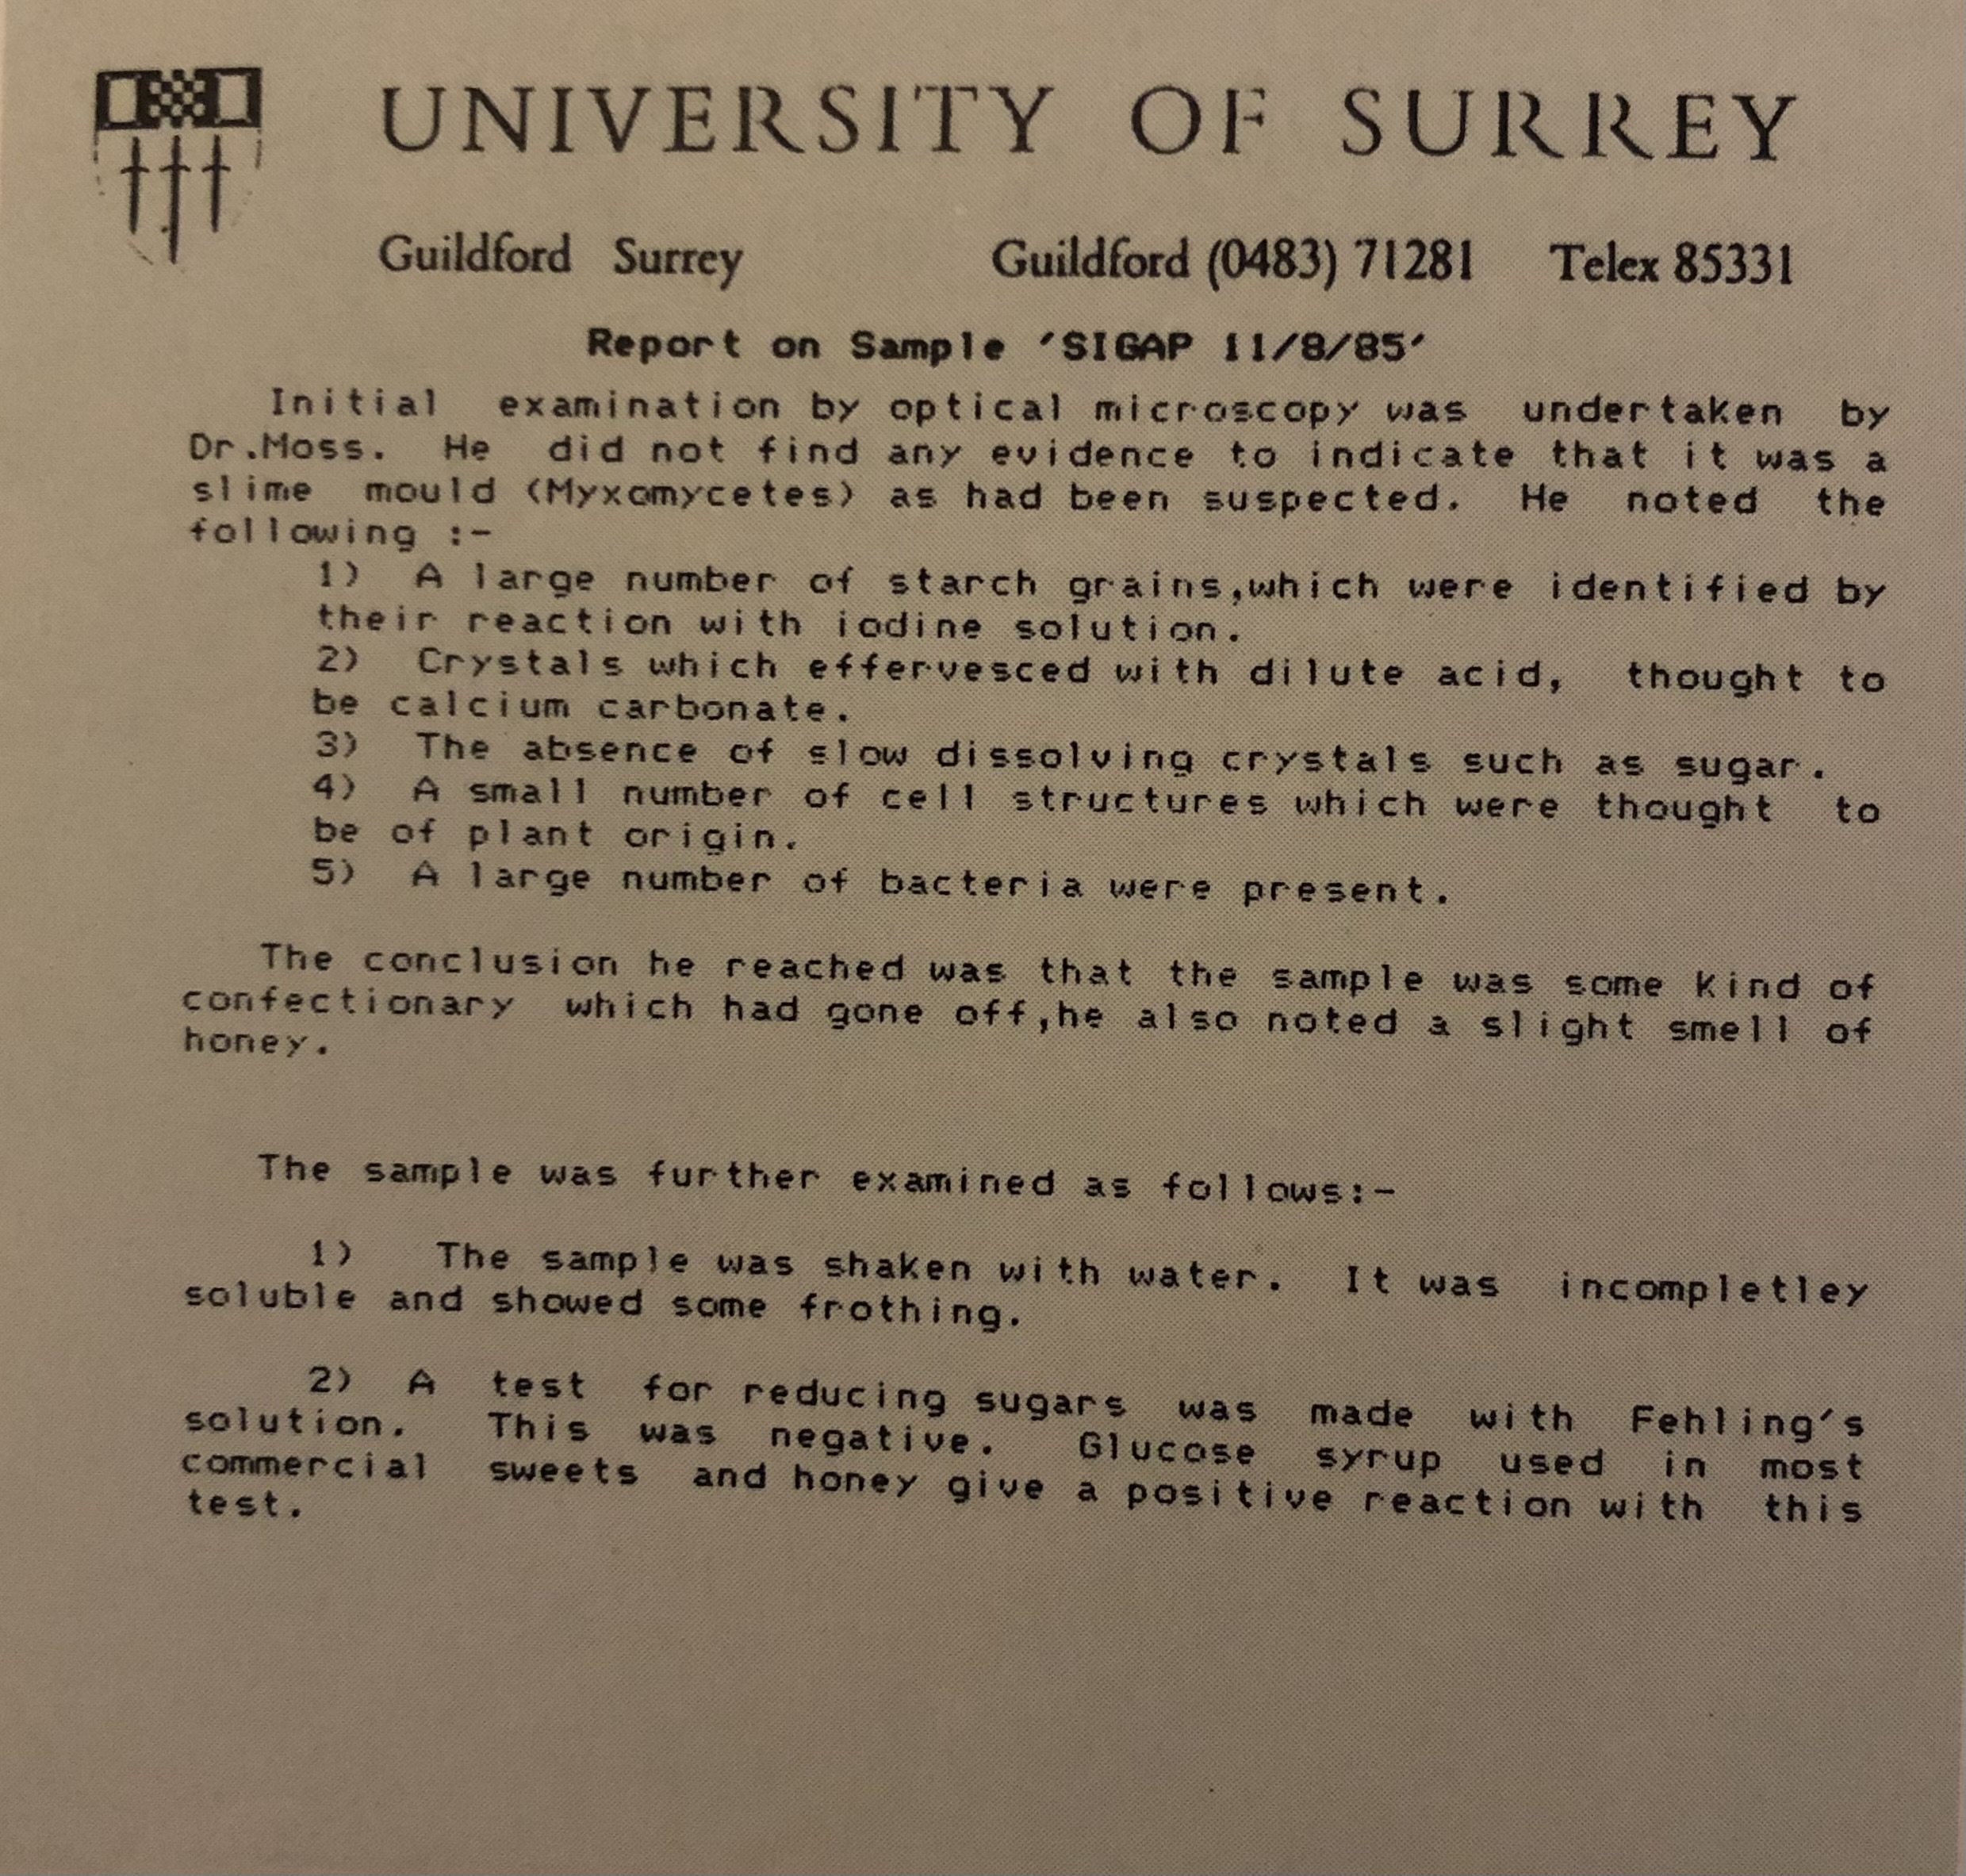 A photograph of a document with a coat of arms logo that reads, ‘UNIVERSITY OF SURREY’ and ‘Report on Sample SIGAP 11/8/85’, ‘Initial examination by optical microscopy was undertaken by Dr. Moss. He did not find any evidence to indicate that it was a slime mould (Myxomycetes) as had been suspected. He noted the following: 1. A large number of starch grains, which were identified by their reaction with iodine solution. 2. Crystals which effervesced with dilute acid, though to be calcium carbonate. 3. The absence of slow dissolving crystals such as sugar. 4. A small number of cell structures which were thought to be of plant origin. 5. A large number of bacteria were present. The conclusion he reached was that the sample was that the sample was some kind of confectionary which had gone off, he also noted a slight smell of honey. The sample was further examined as follows: 1. The sample was shaken with water. It was incompletely soluble and showed some frothing. 2. A test for reducing sugars was made with Fehling’s solution. This was negative. Glucose syrup used in most commercial sweets and honey give a positive reaction with this test.’